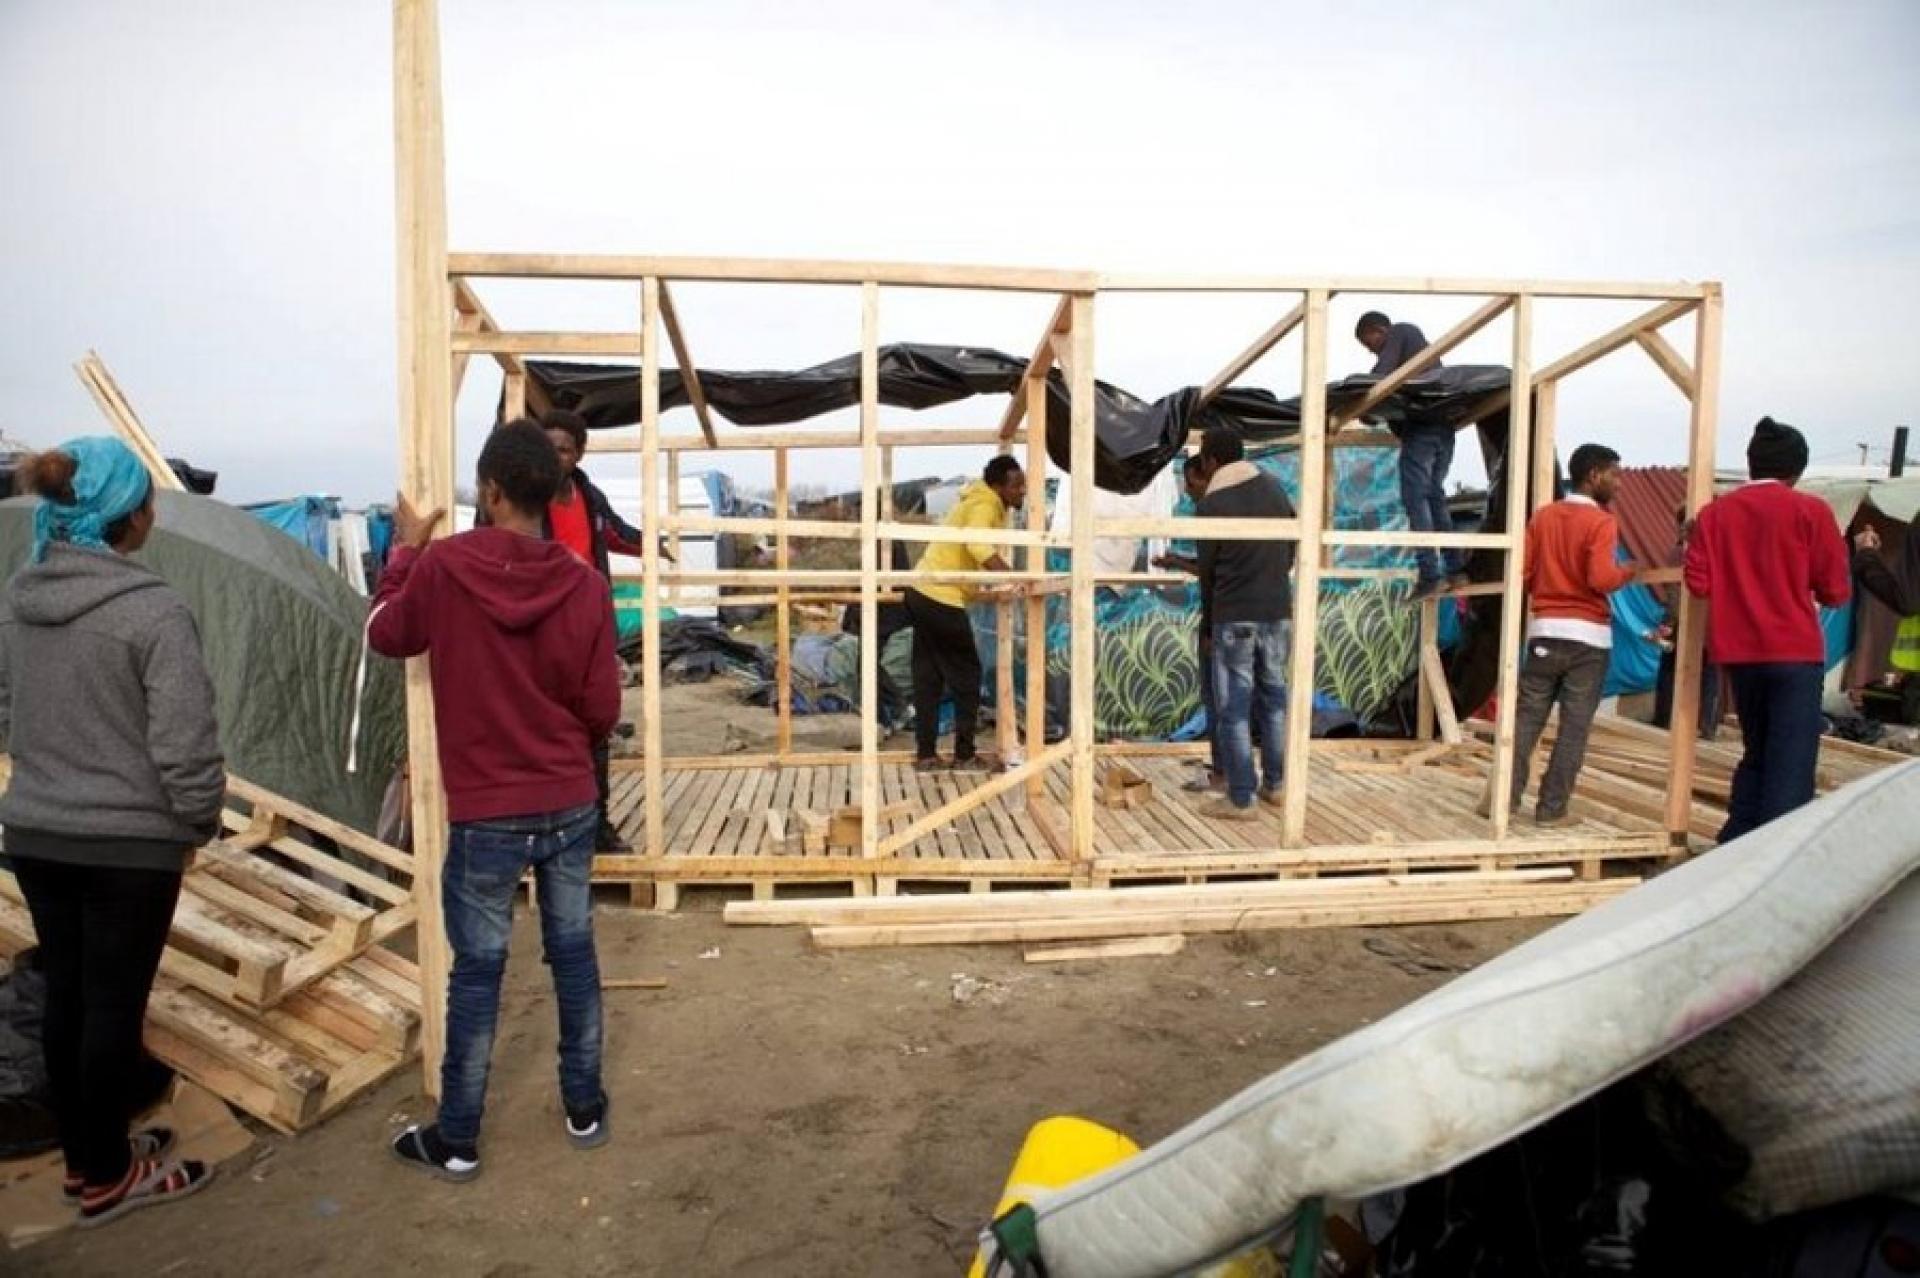 Refugees, volunteers, and NGOs cooperating on the construction of camp facilities at Calais Refugee Camp. | Photo by Building in Calais Jungle